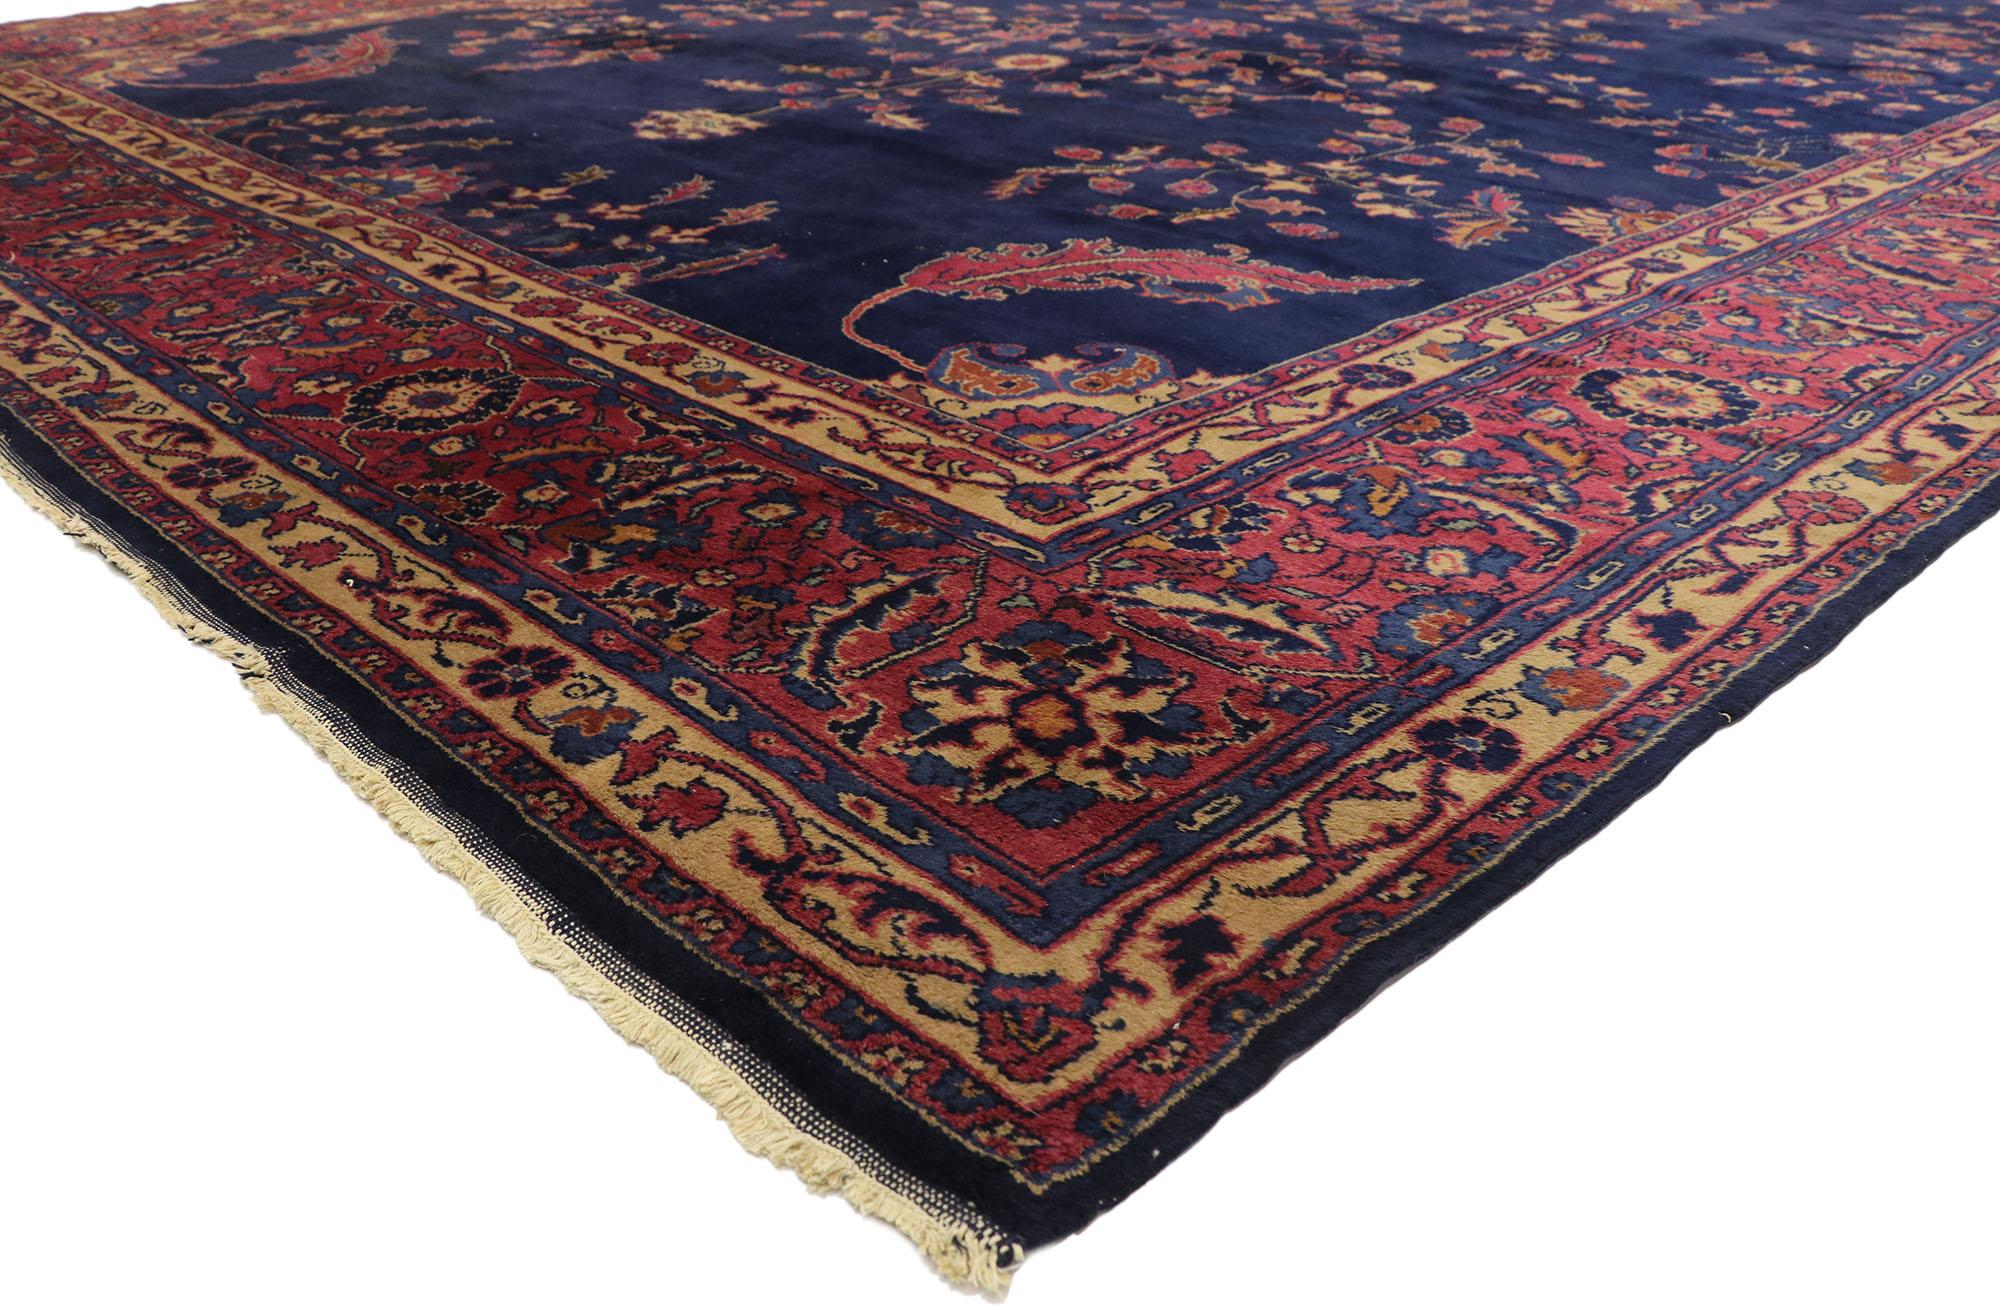 72027 Antique Turkish Sparta Palace Size Rug with Luxe Victorian Style 11'01 x 20'02. Rich in color, texture and beguiling ambiance, this hand knotted wool palace size antique Sparta rug beautifully embodies a luxe Victorian style. The abrashed navy